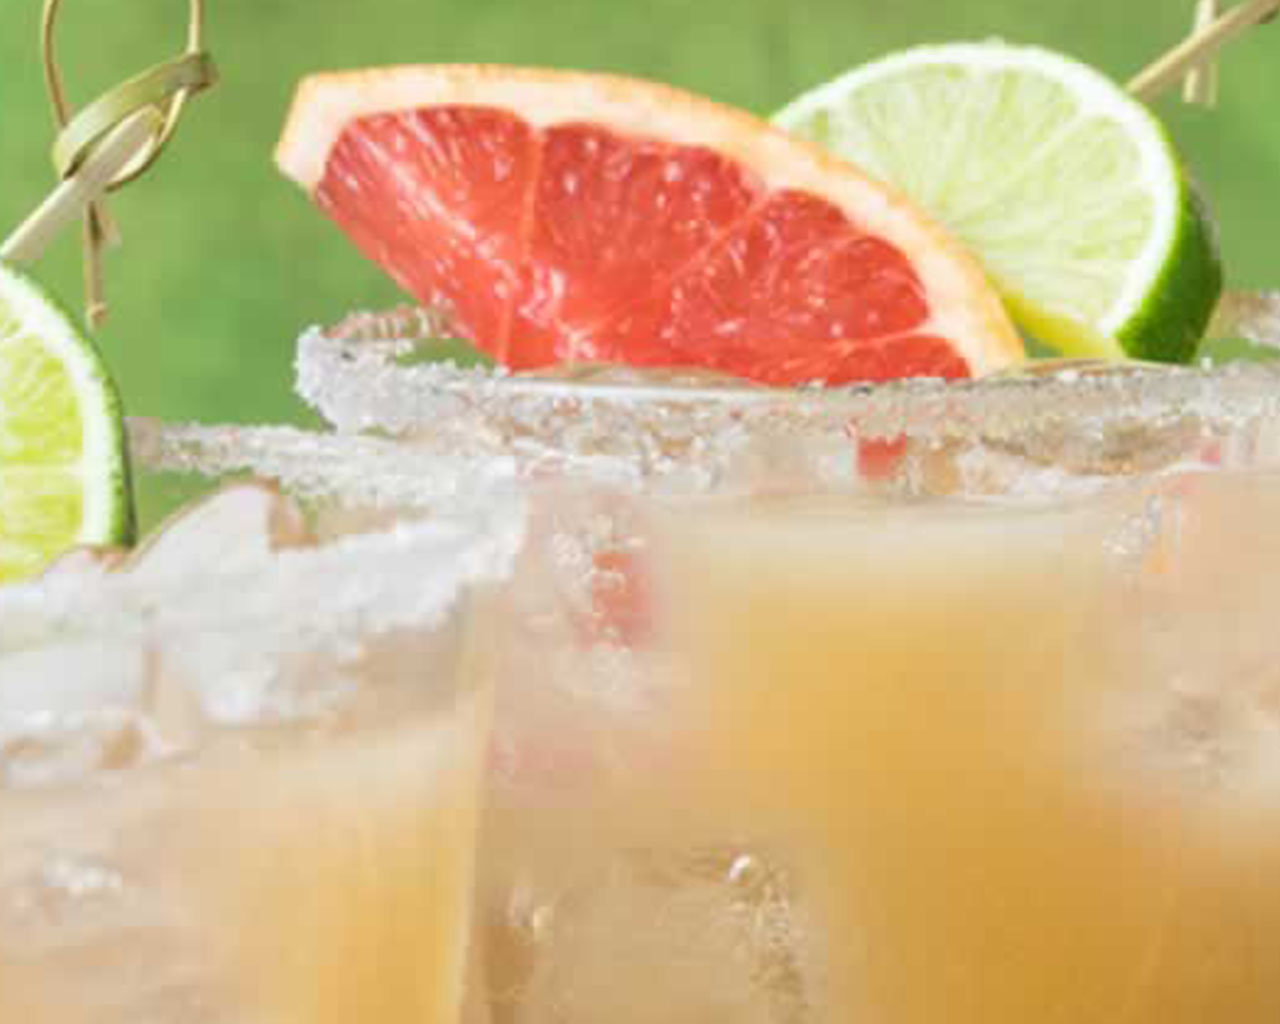 https://www.coca-cola.com/content/dam/onexp/us/en/brands/simply/recipes-and-mixology/juices-and-drinks/juice-and-drinks-lp/USA_simply_grapefruit_margarite_campaign_card_right_desktop_1280x1024.jpg